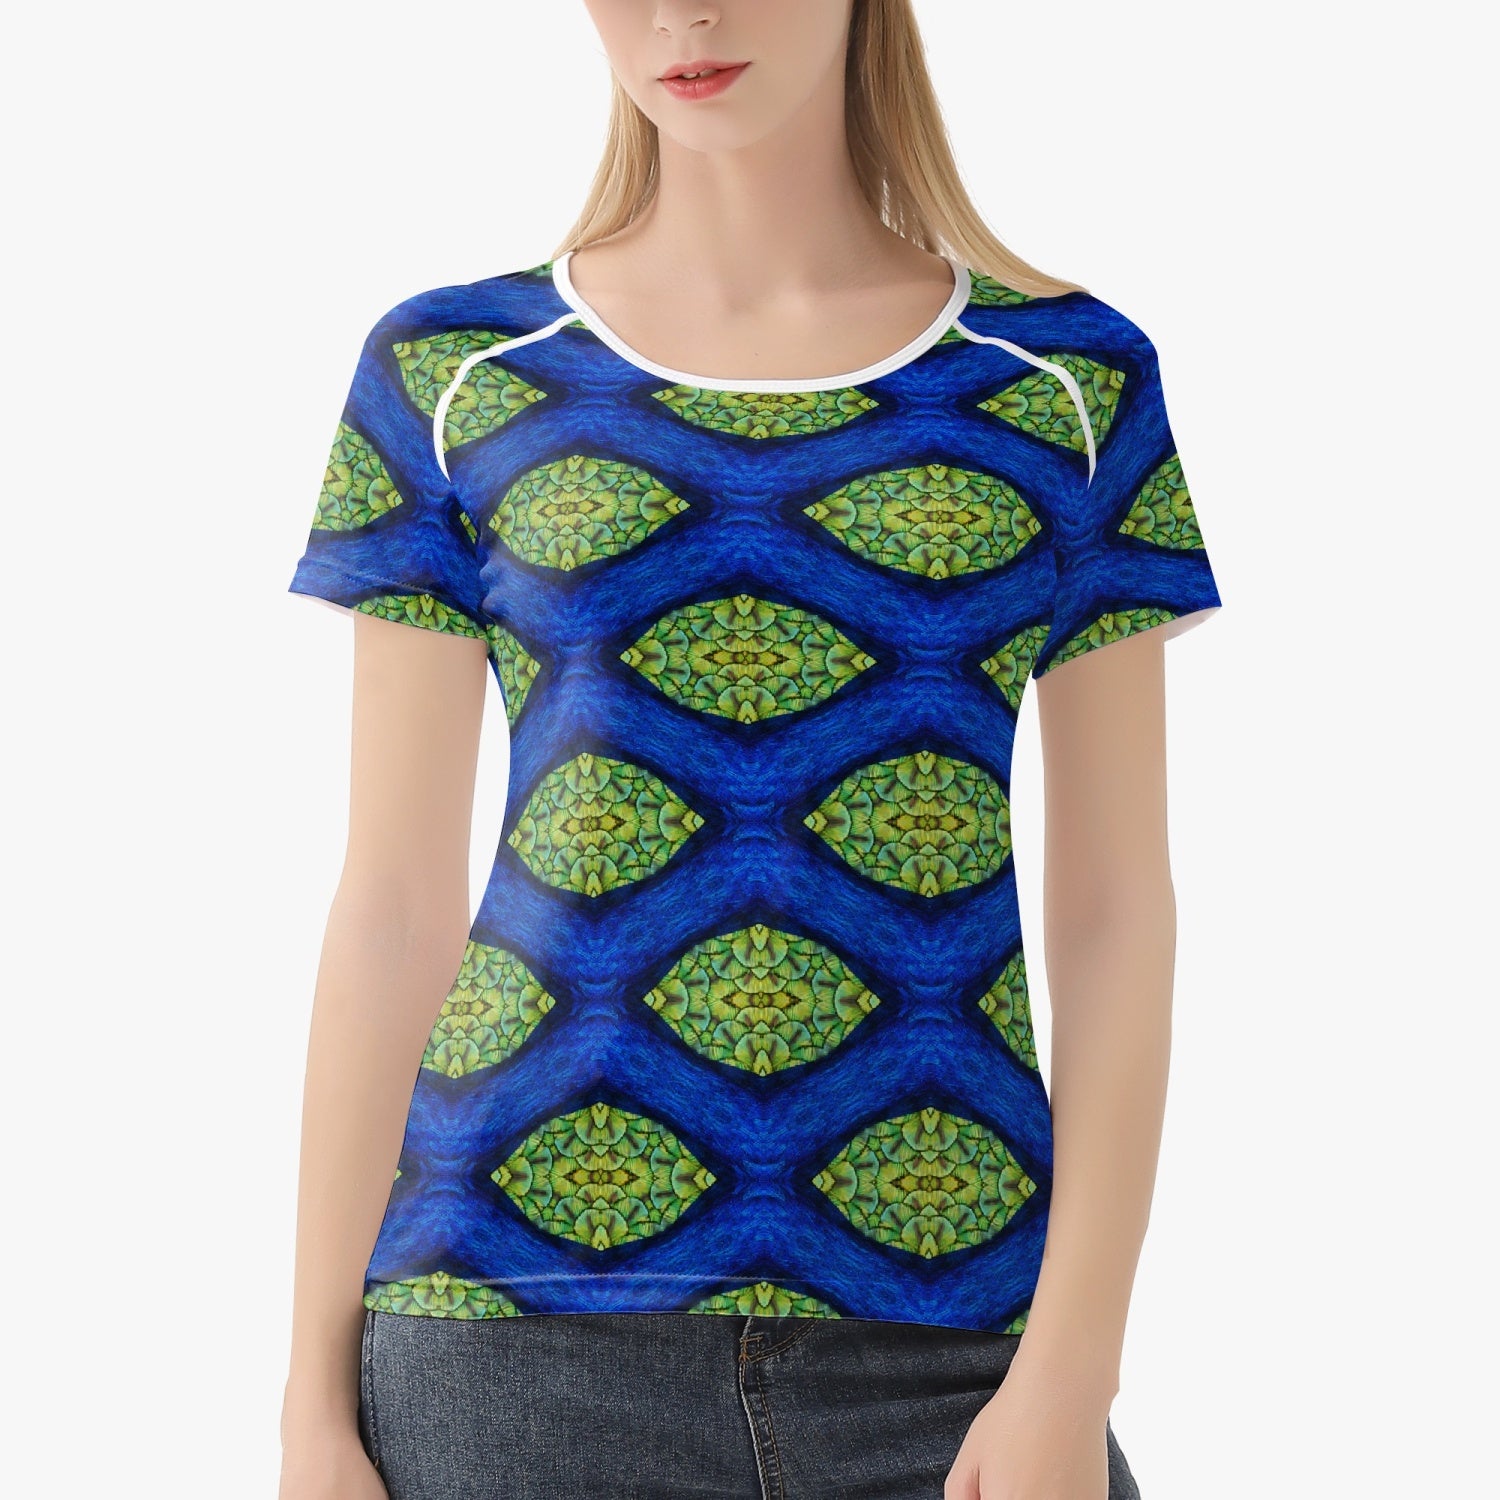 The Heart and Brain connection Handmade Yoga Top for Women T-shirt, by Sensus Studio Design